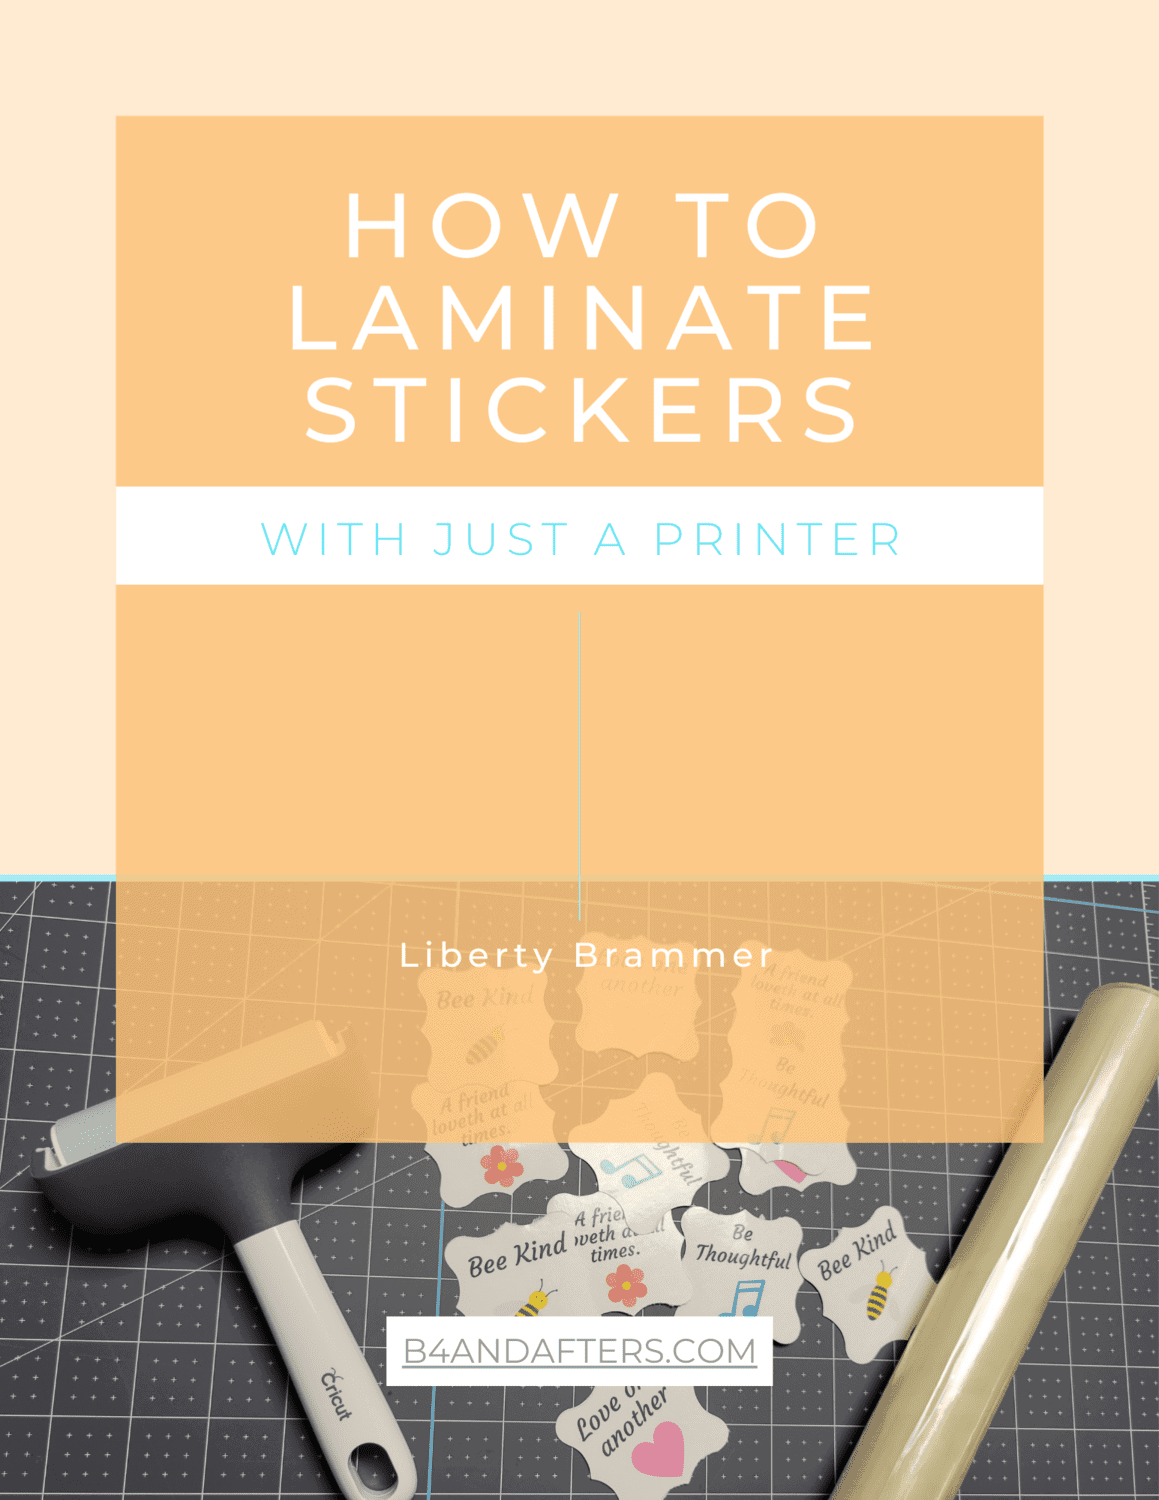 How to Make Laminated Stickers with just a Printer